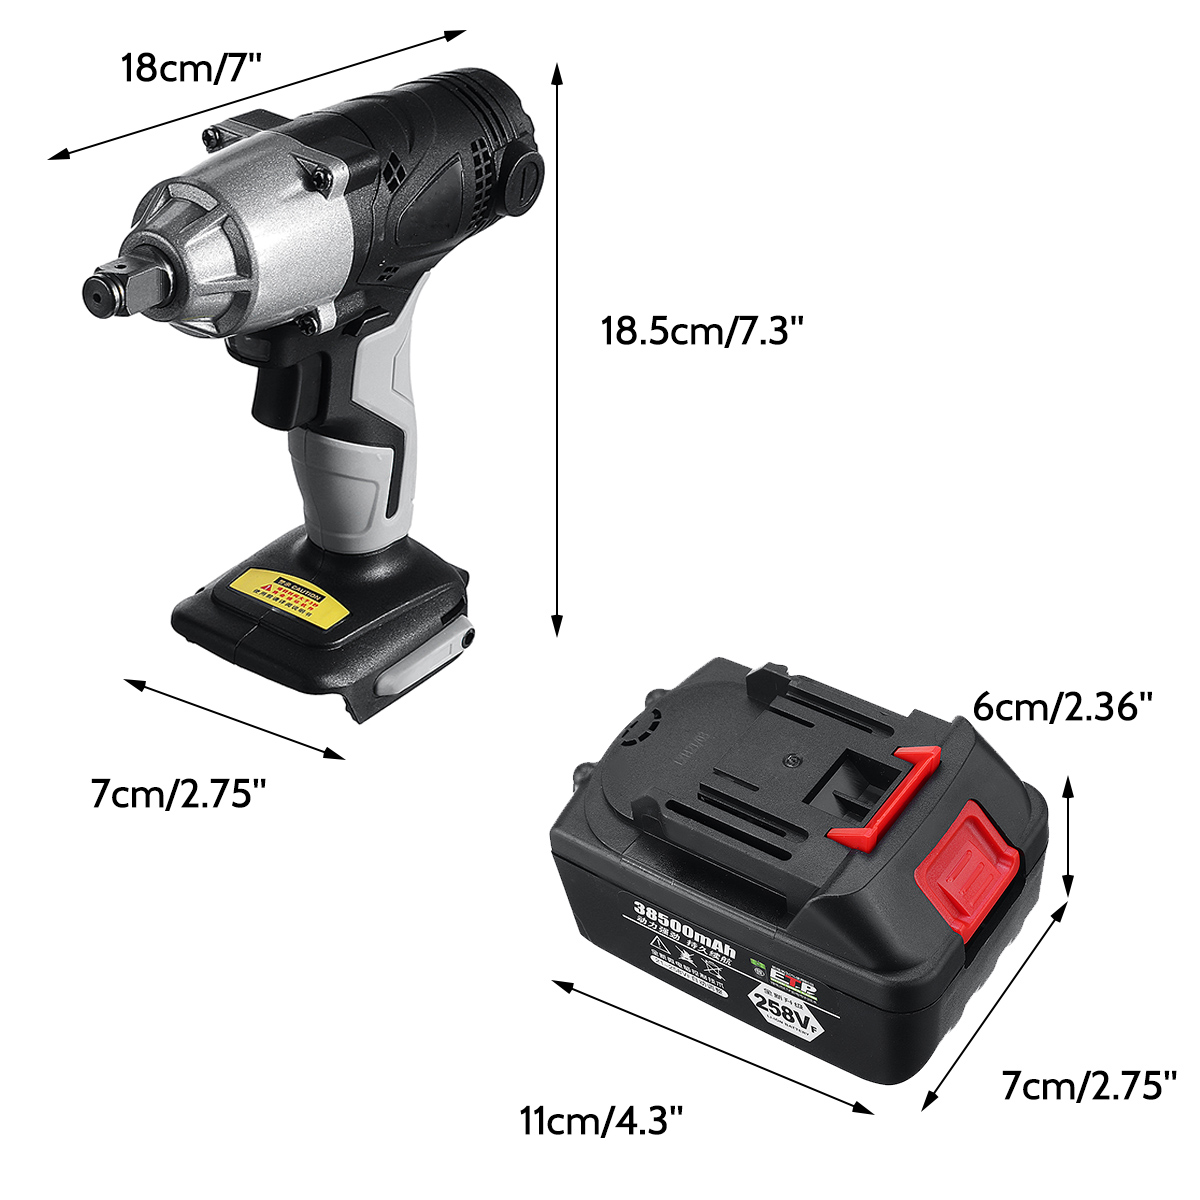 258VF-Cordless-Brushless-Electric-Impact-Wrench-Rechargeable-Wrench-Screwdriver-Power-Tool-W-12pcs-B-1839472-9